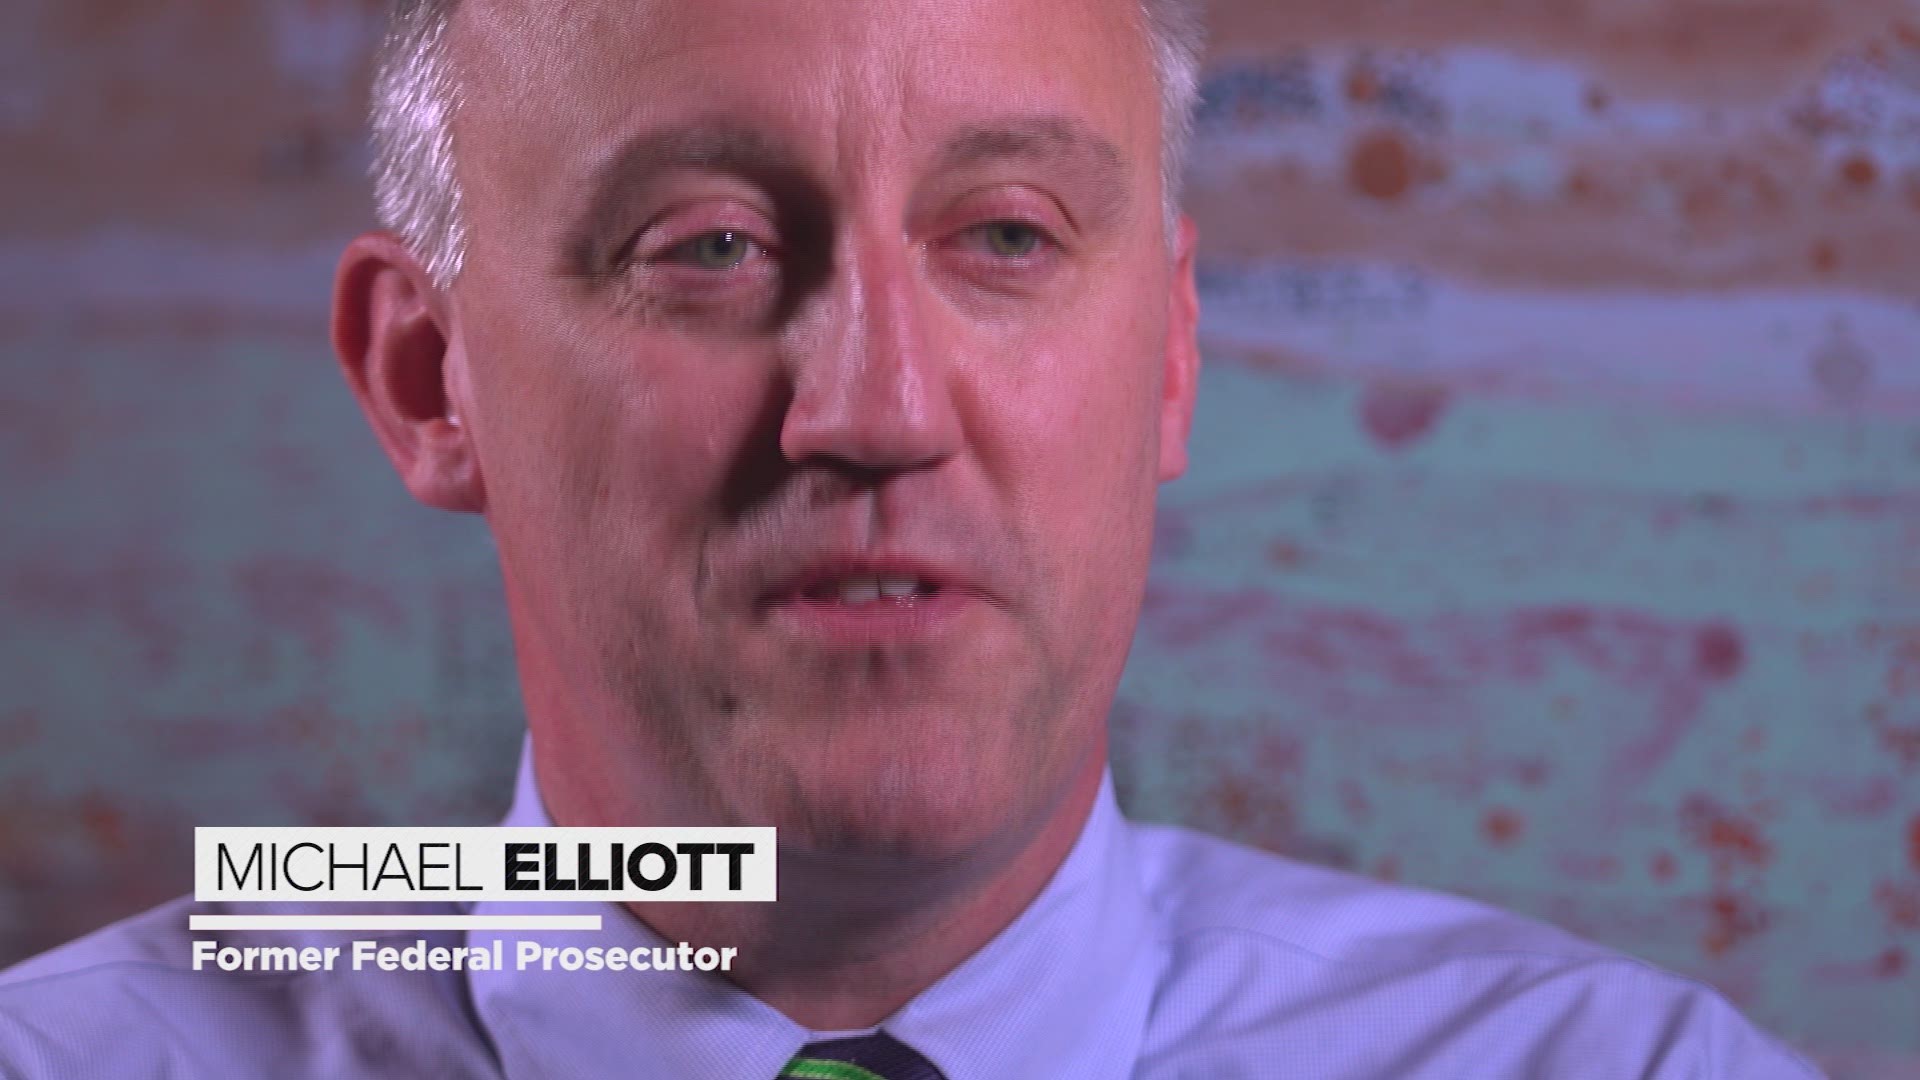 Former federal prosecutor  Michael Elliott talks about what the U.S. Food & Drug Administration doesn't regulate and what you can do to take precautions when it comes to compounded drugs.